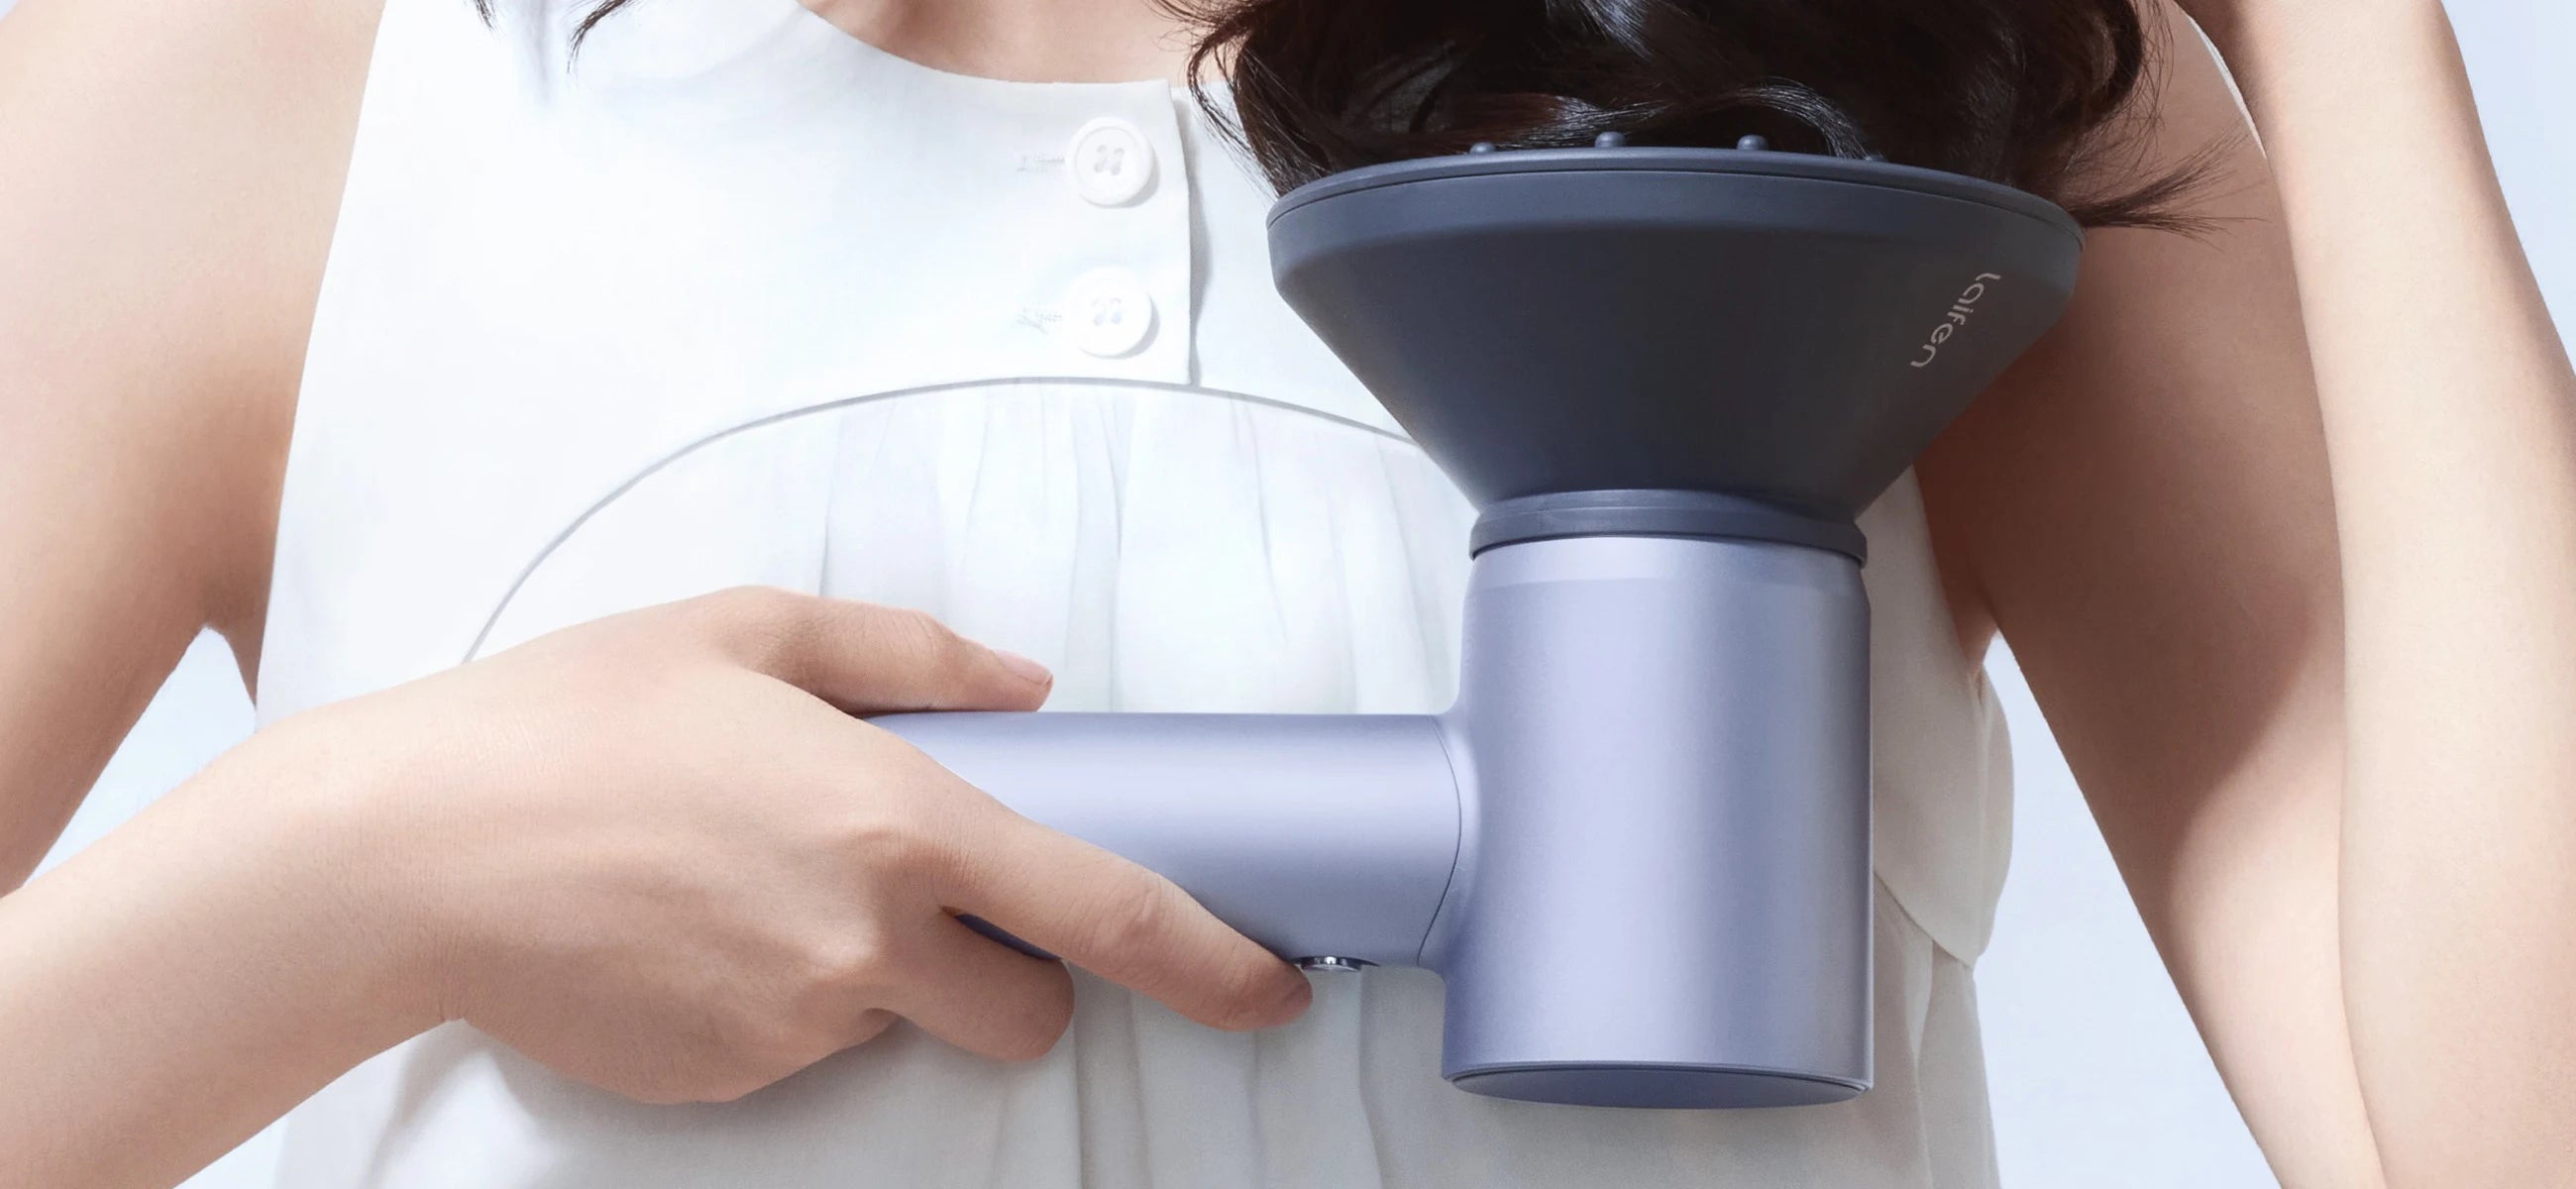 What distinguishes a diffuser from a hair dryer?